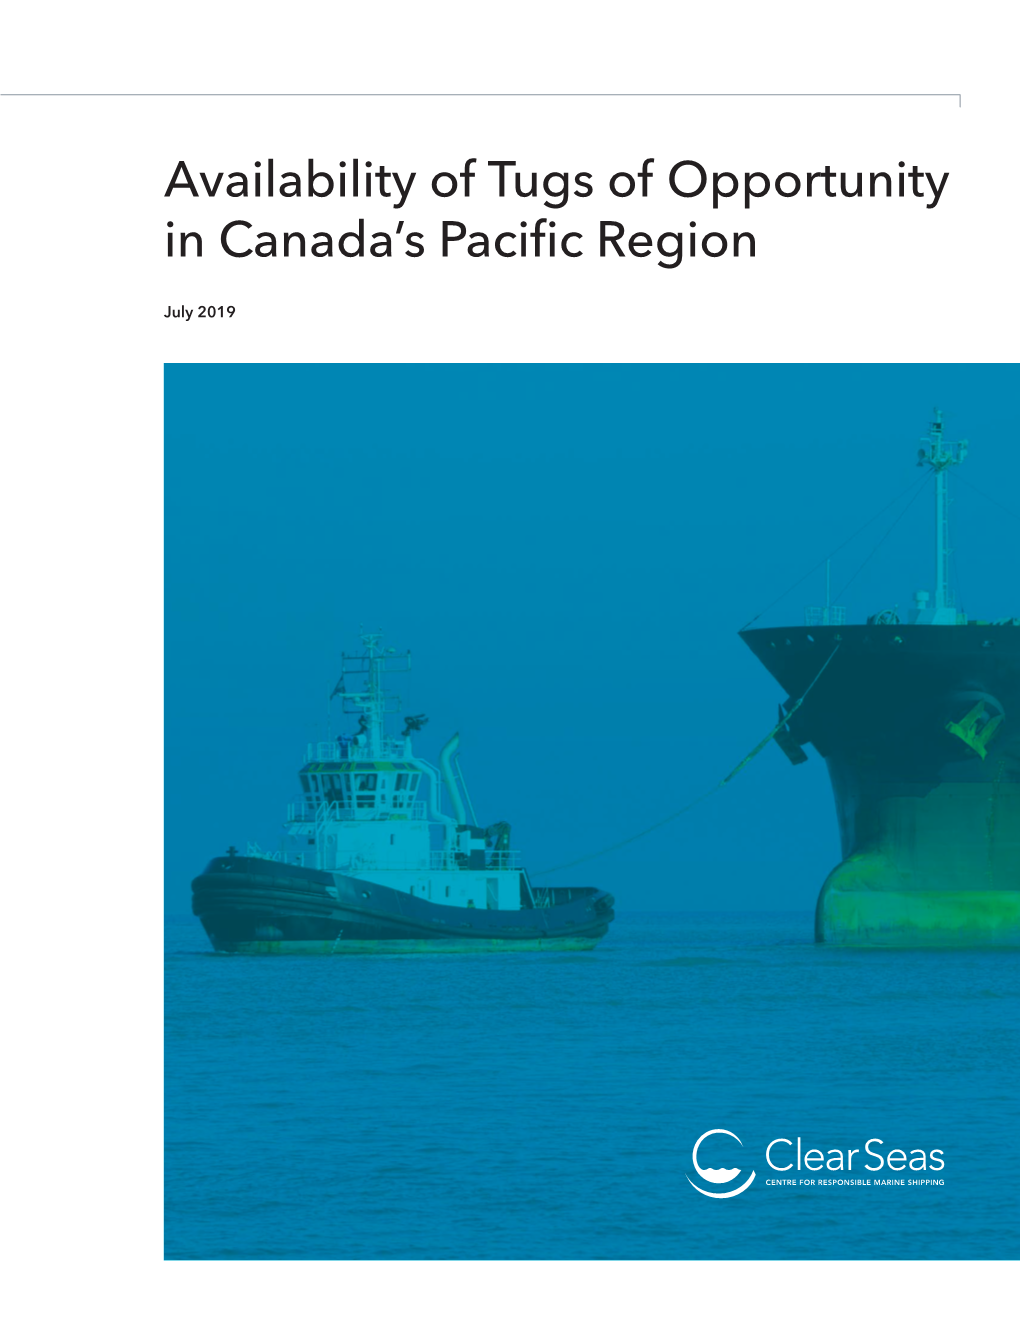 Availability of Tugs of Opportunity in Canada's Pacific Region